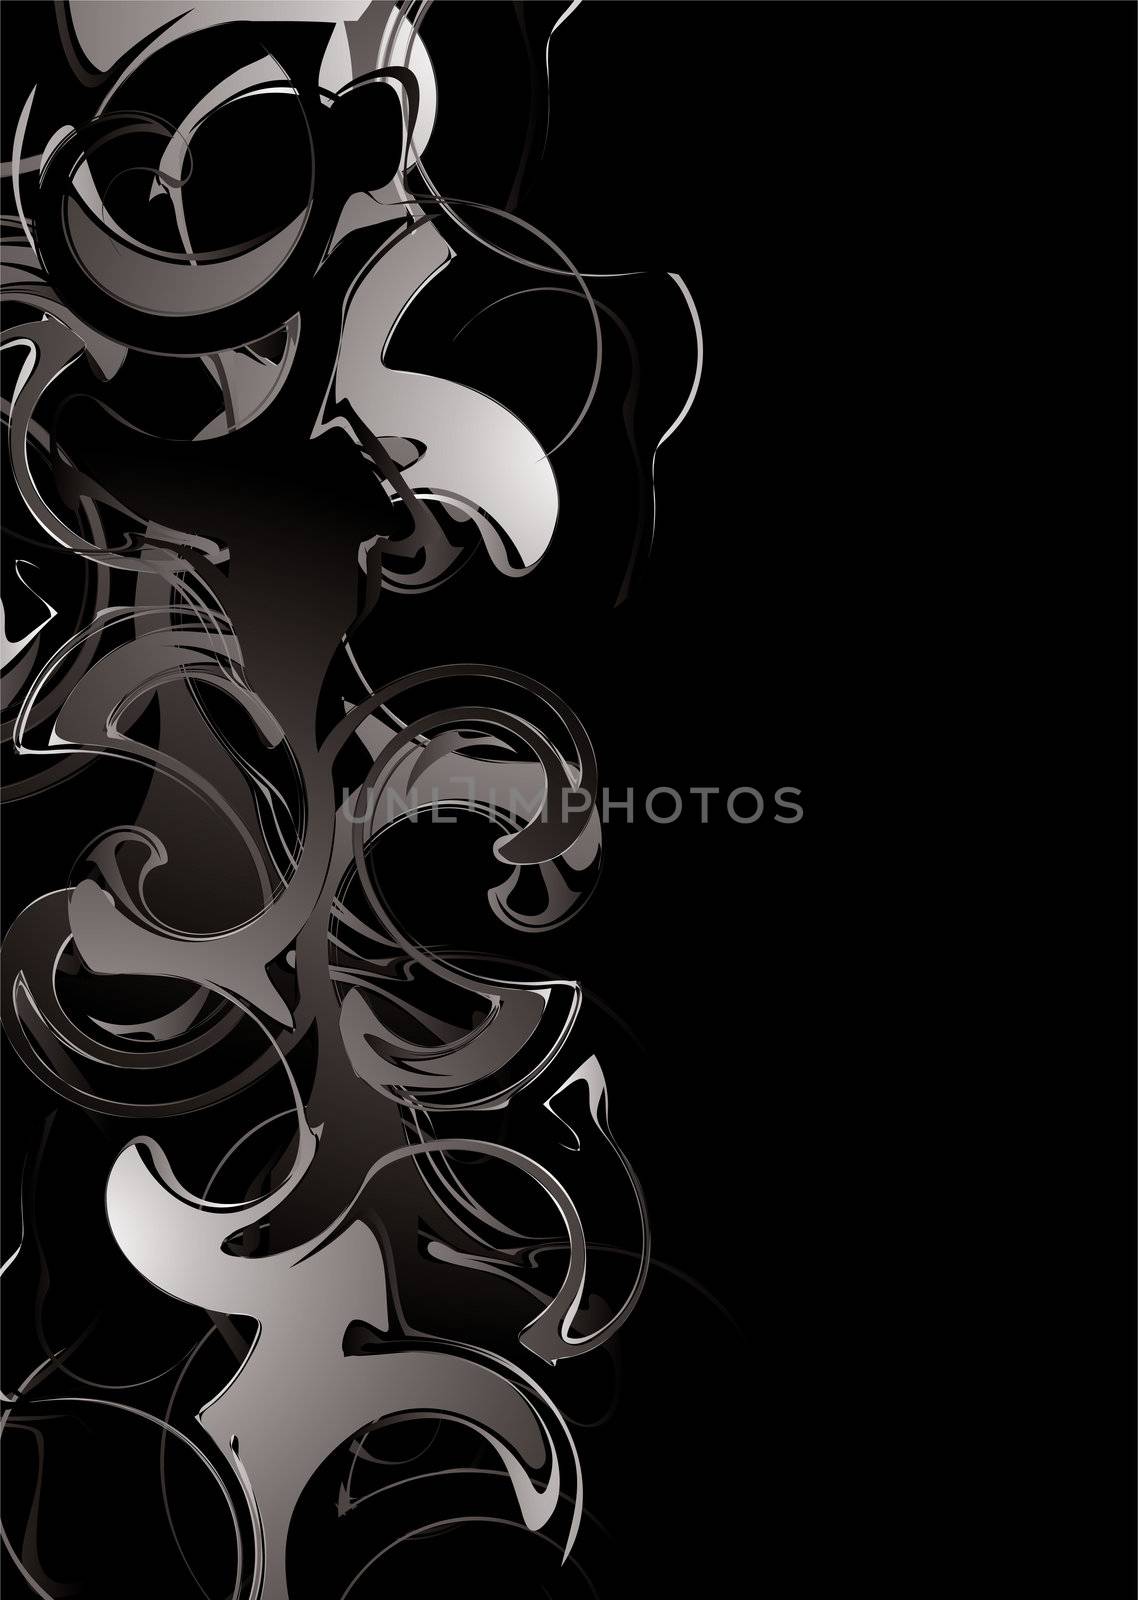 Abstract background with a smoke design in black and silver